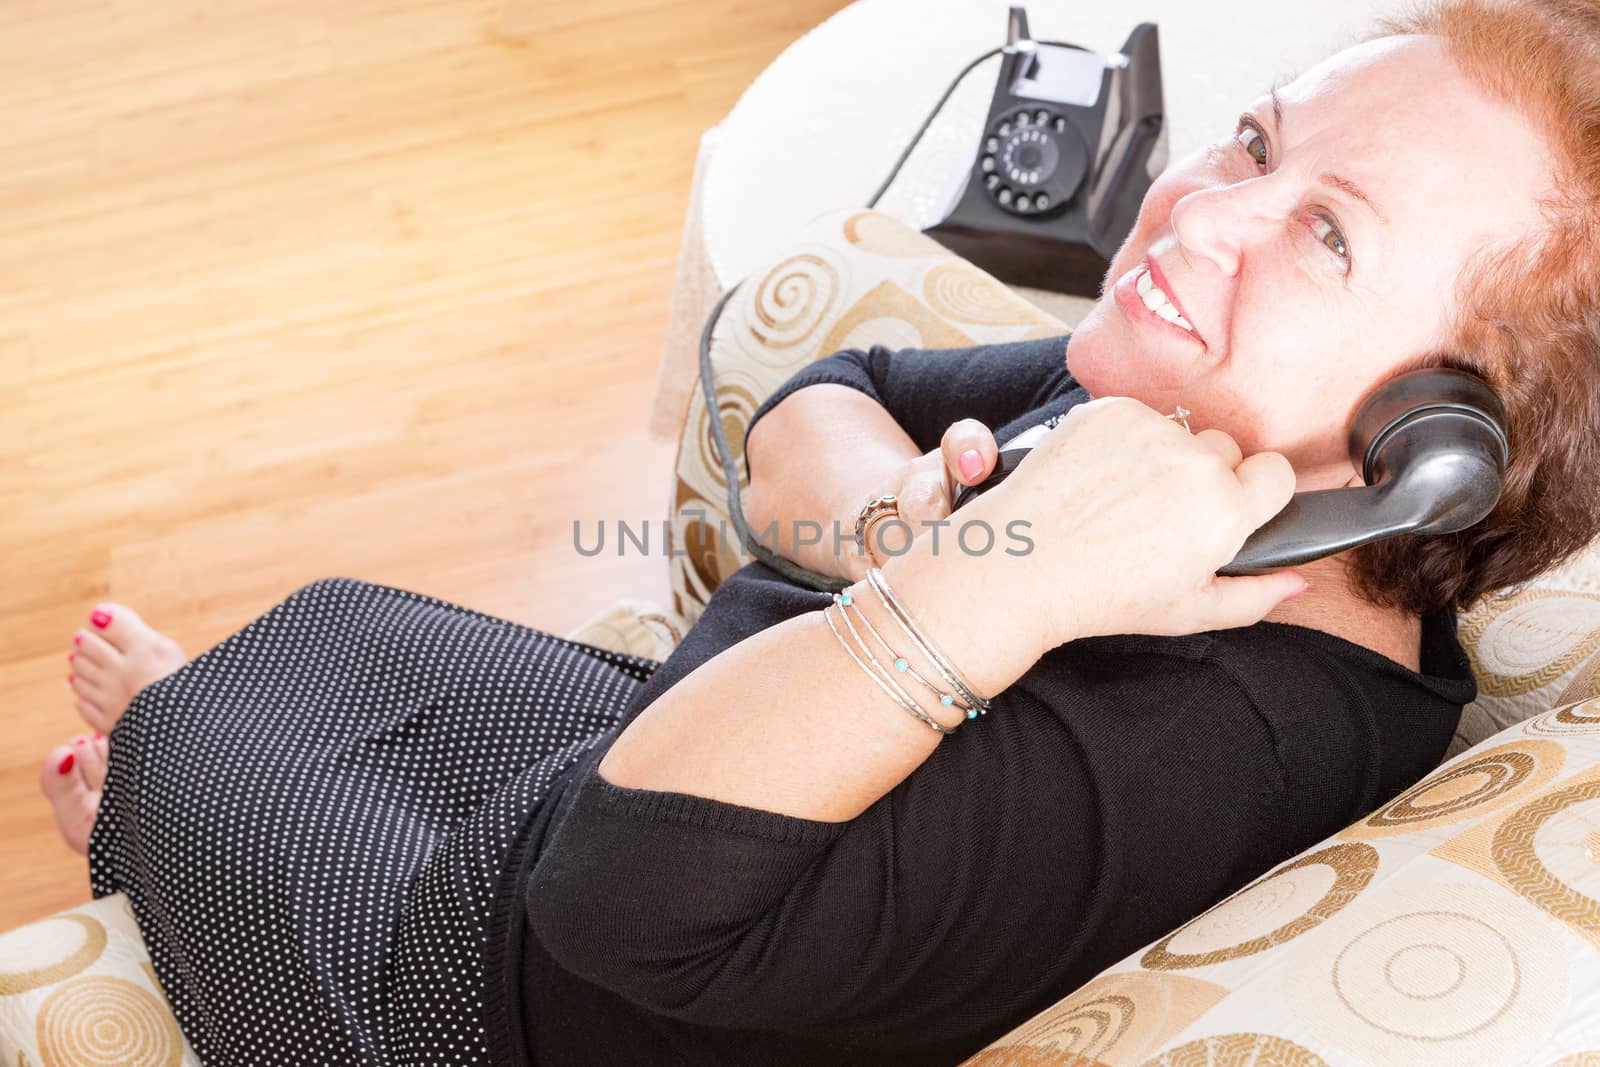 Grandmother relaxing at home in a comfy armchair in a stylish black dress and bare feet talking on a retro rotary phone looking up with a smile to confirm good news, view from above